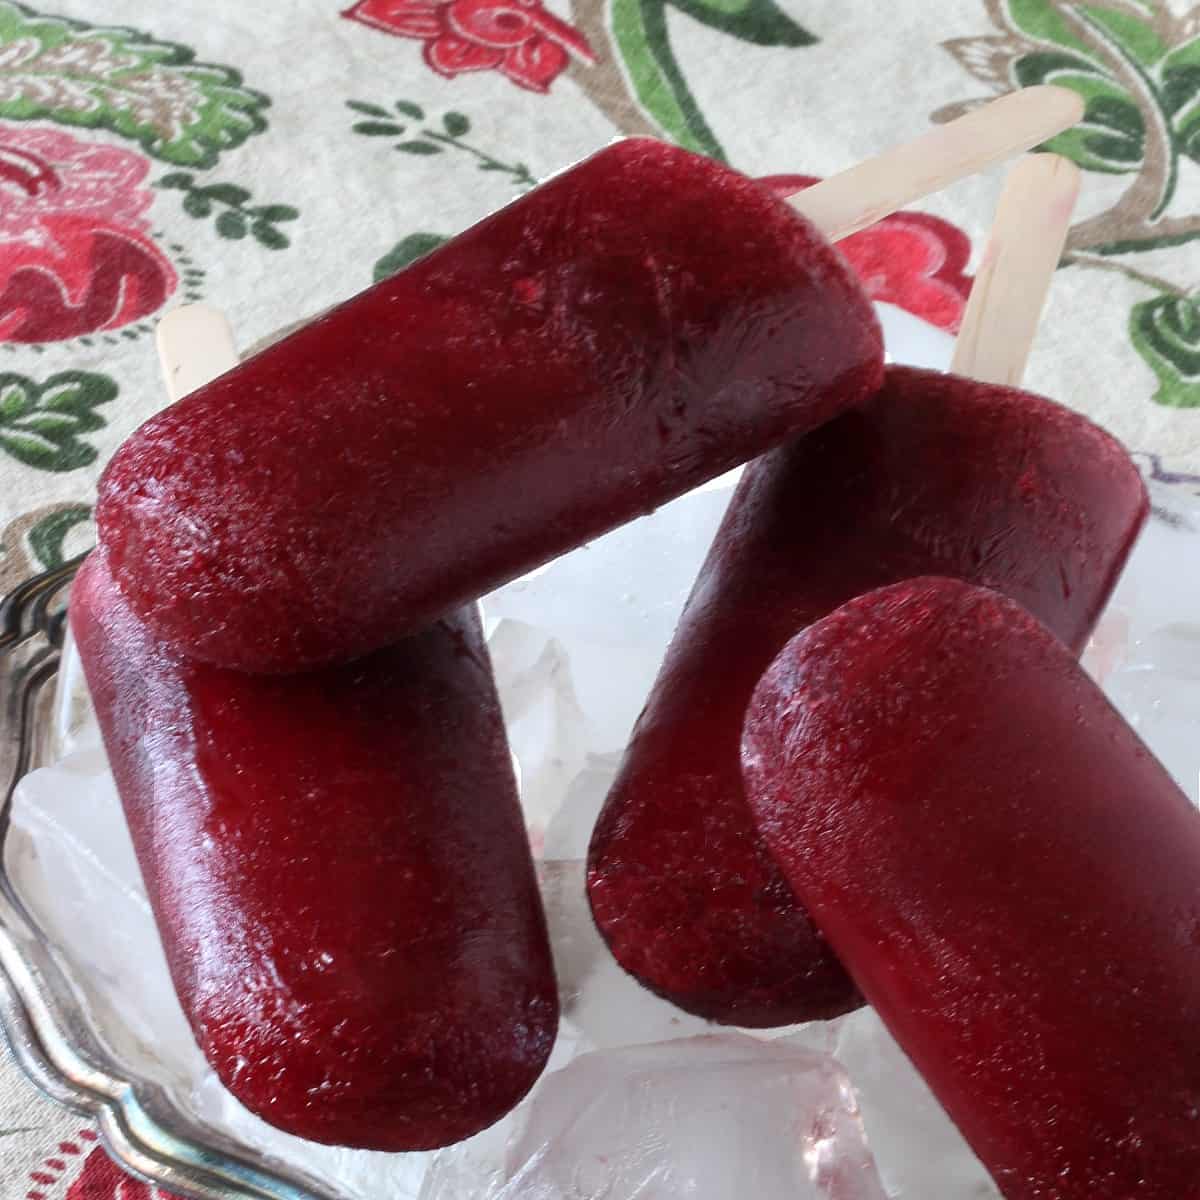 Four seedless blackberry popsicles laying criss-cross on top of each other and on a bed of ice in a silverplate tray.